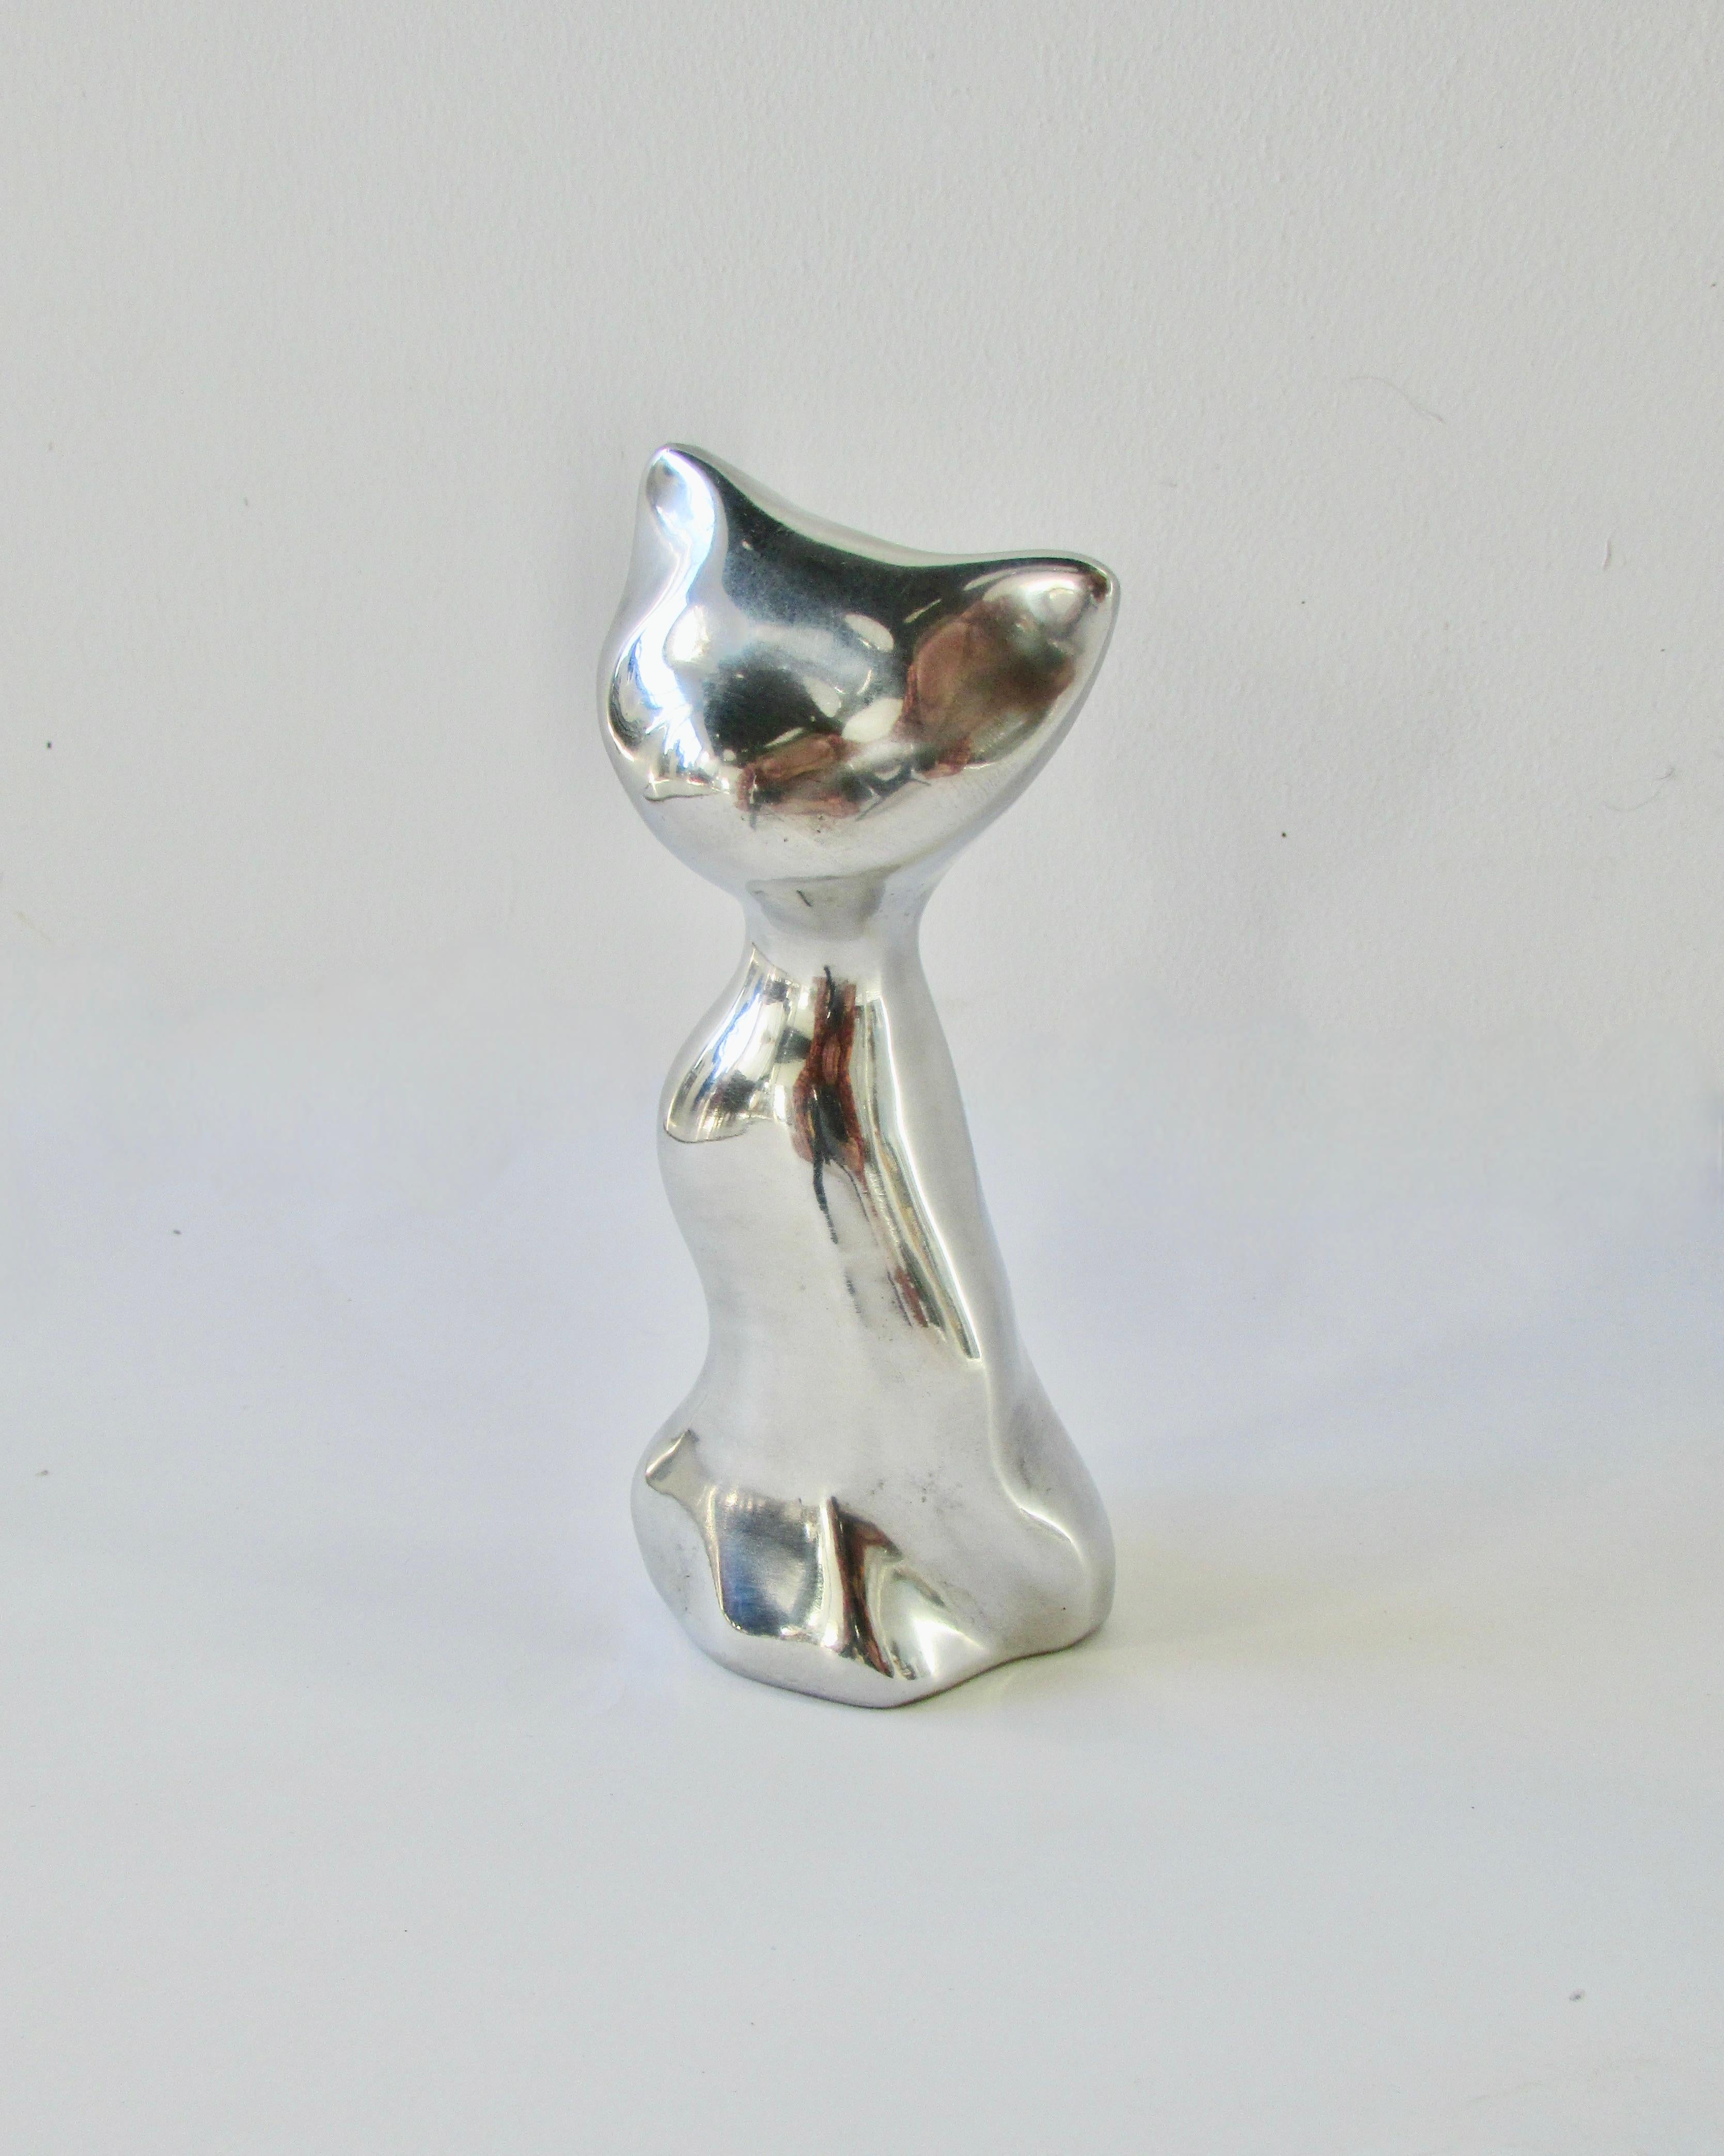  Nicely interpreted abstract form of sitting cat . Cast in aluminum and polished . Signed on underside Hoselton Canada .